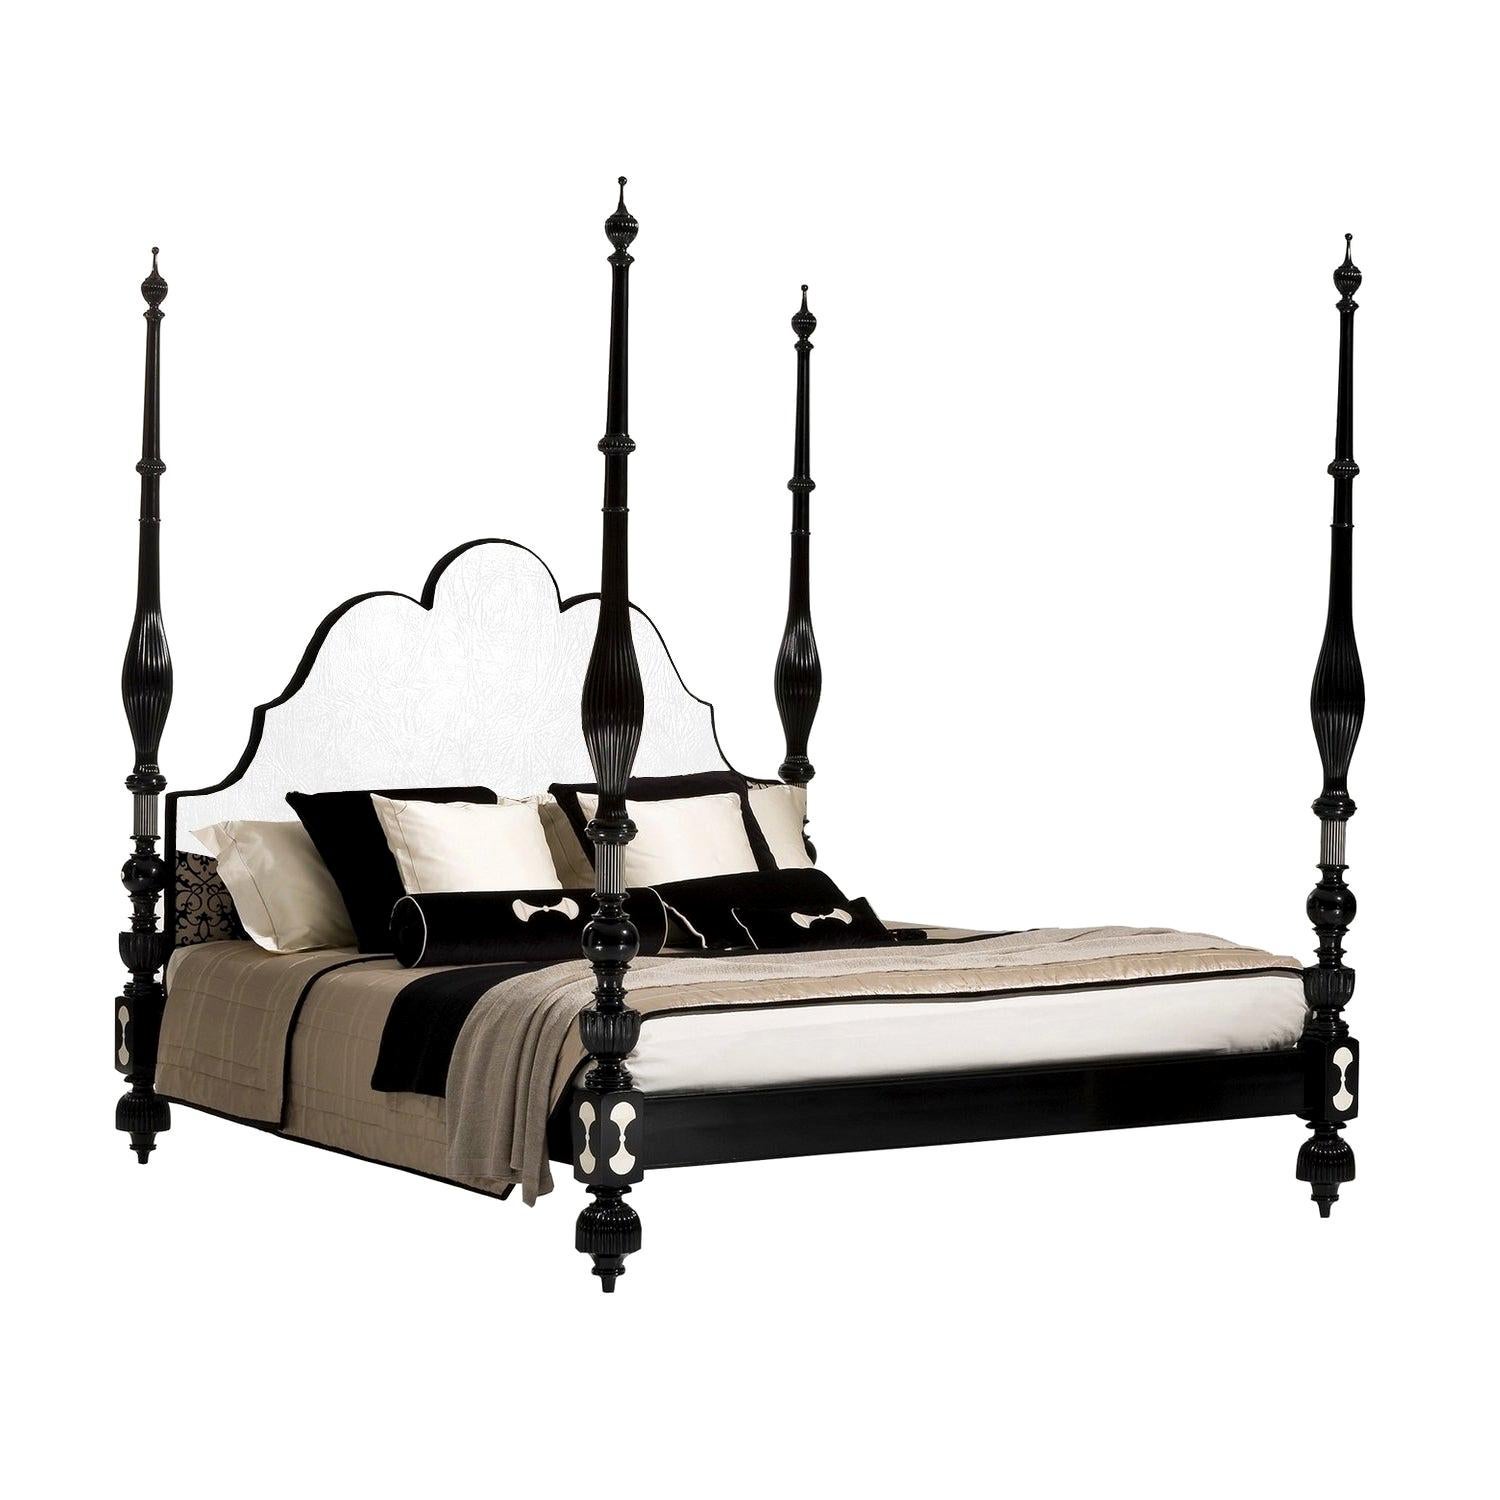 In stock in Los Angeles, Black Marrakesh Four Poster Pacha King Size Bed